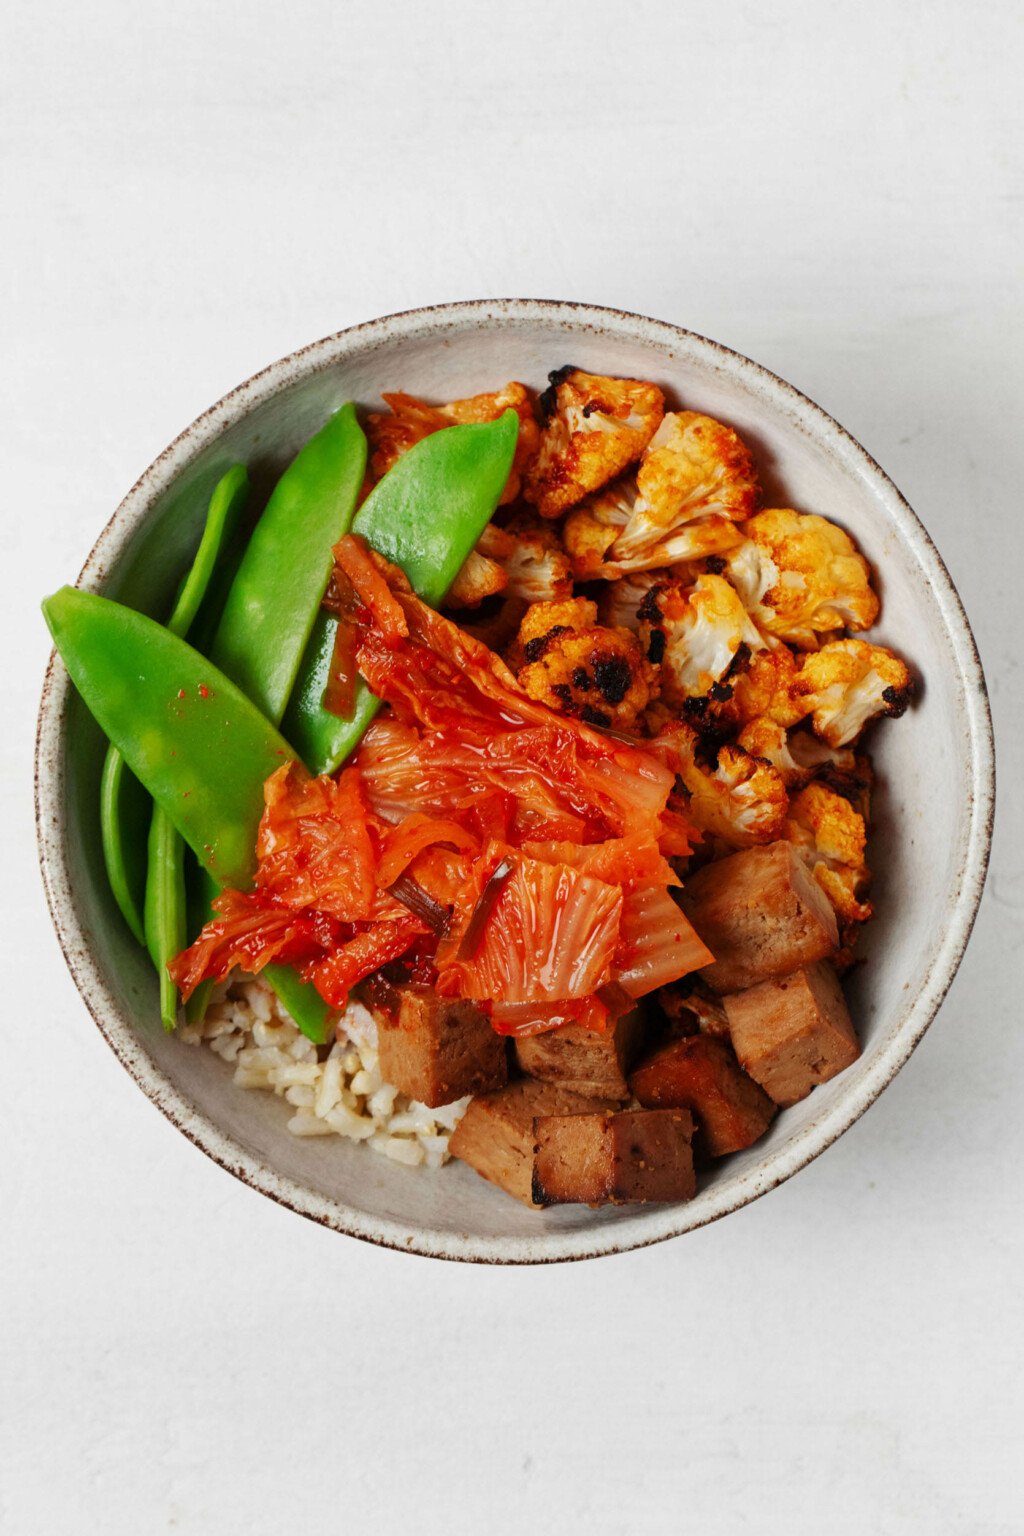 An overhead image of a plant-based bowl meal filled with kimchi, snow peas, tofu cubes, and cauliflower.